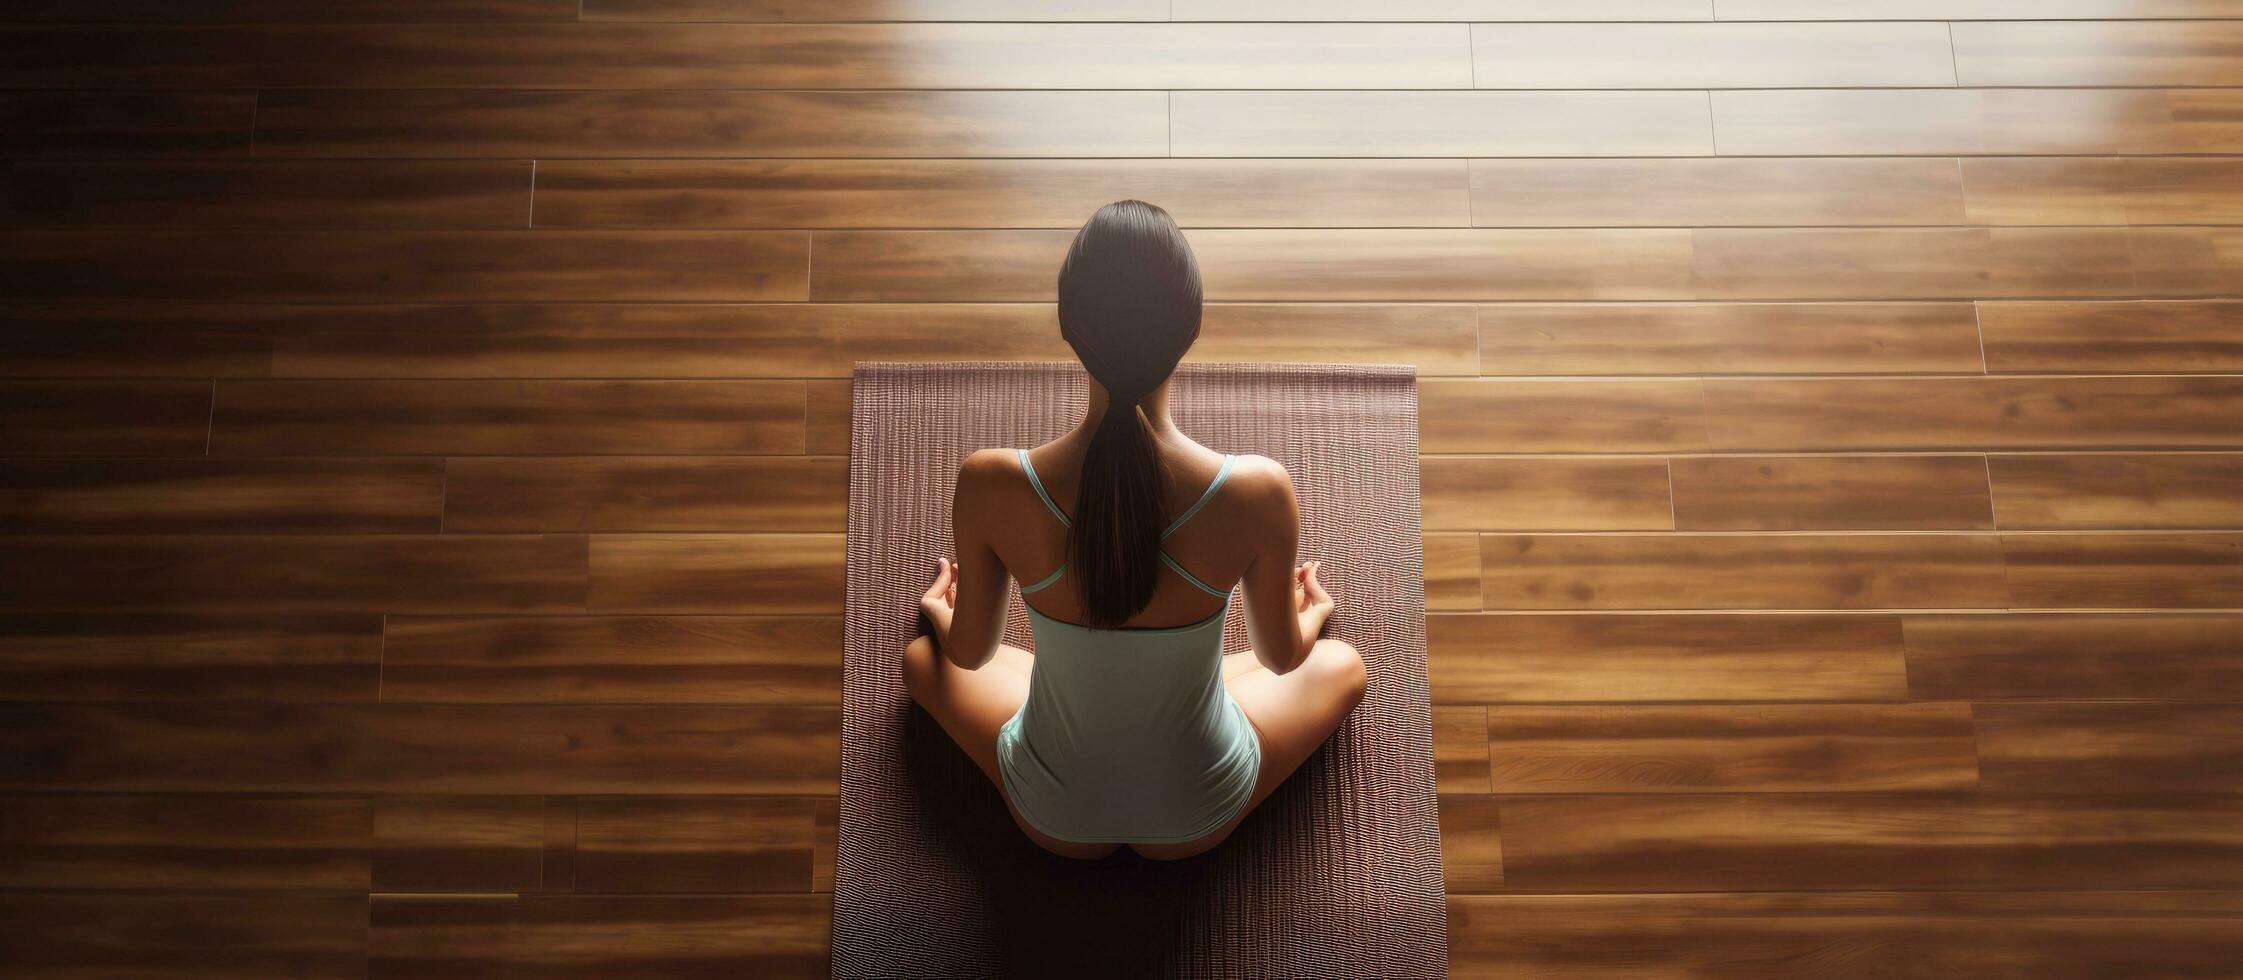 Top down view of a young woman doing yoga indoors sitting in a relaxed posture on a wooden floor meditating and finding inner peace creating copy space photo